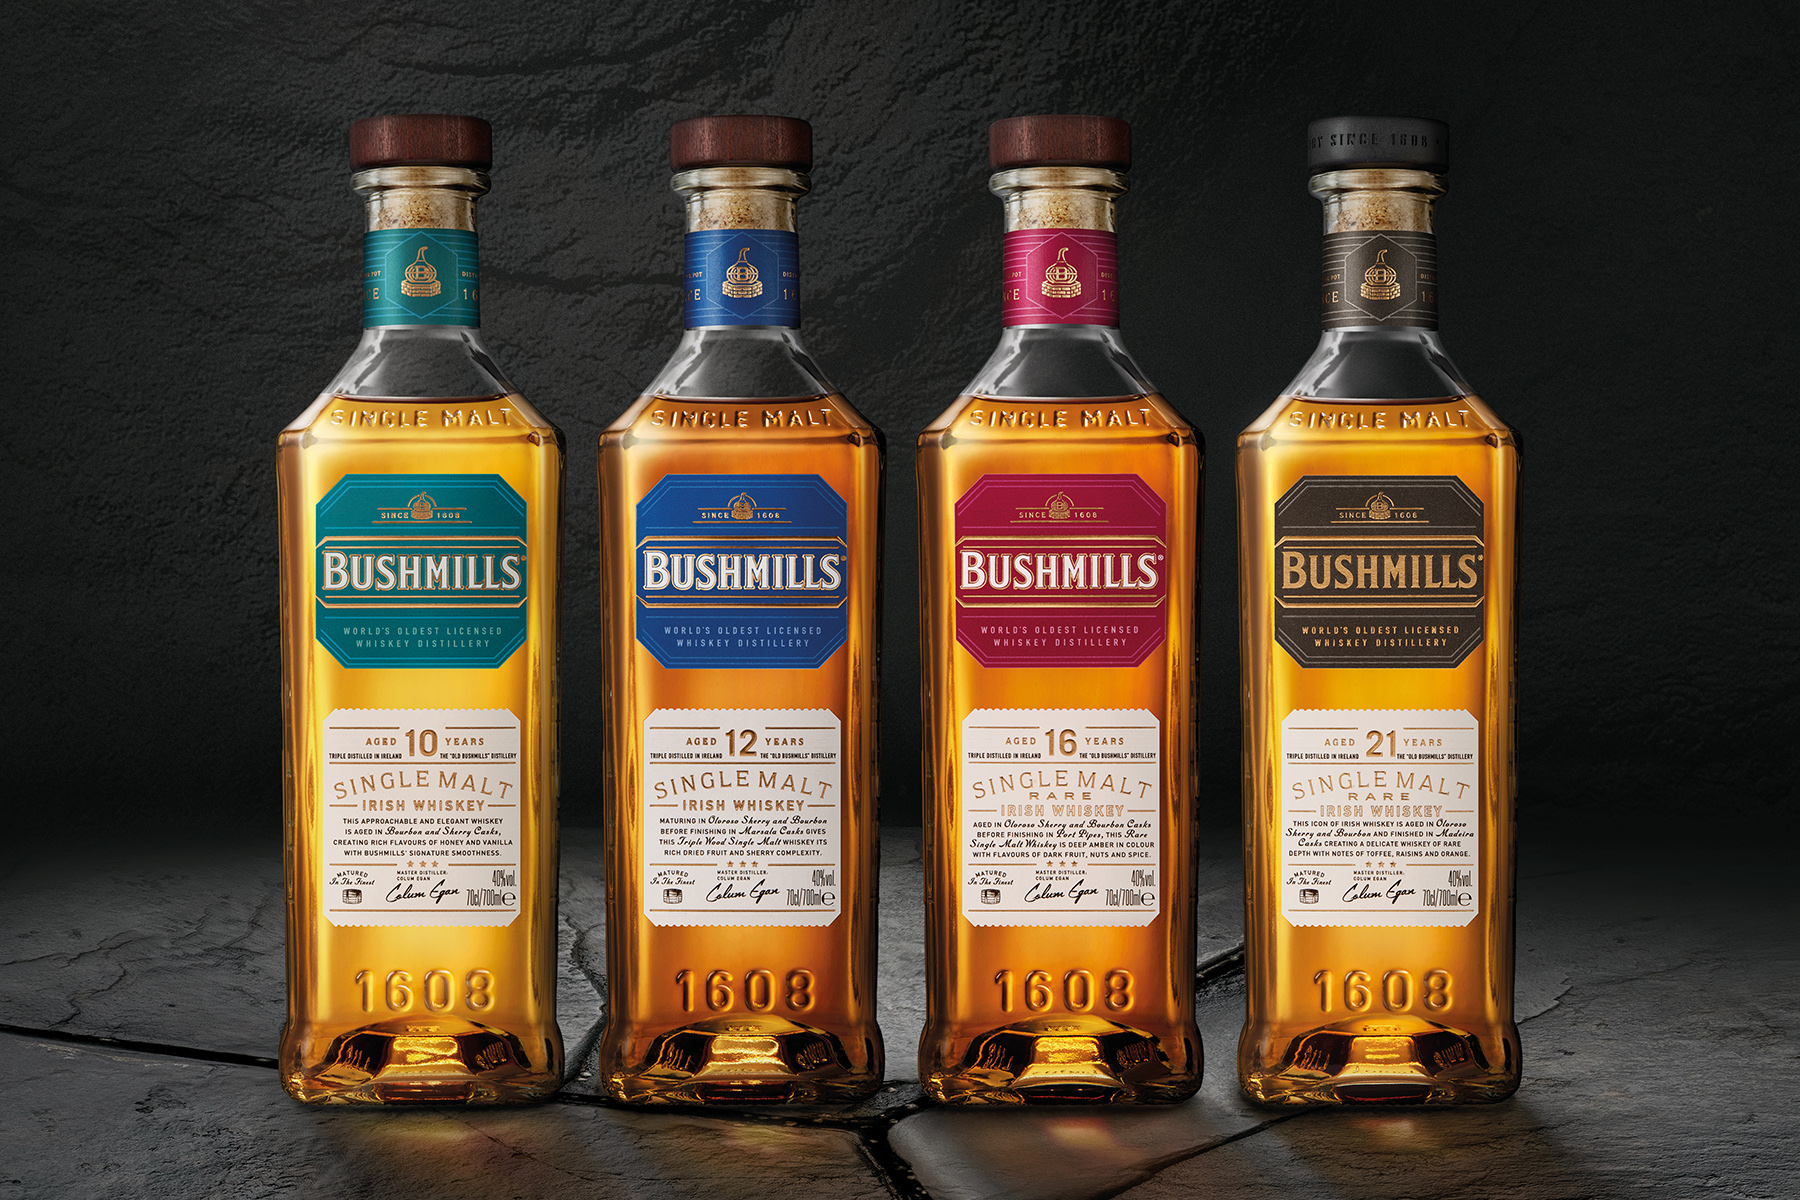 Bushmills' core lineup of single malts, including the 12-year, which is brand new to the US market